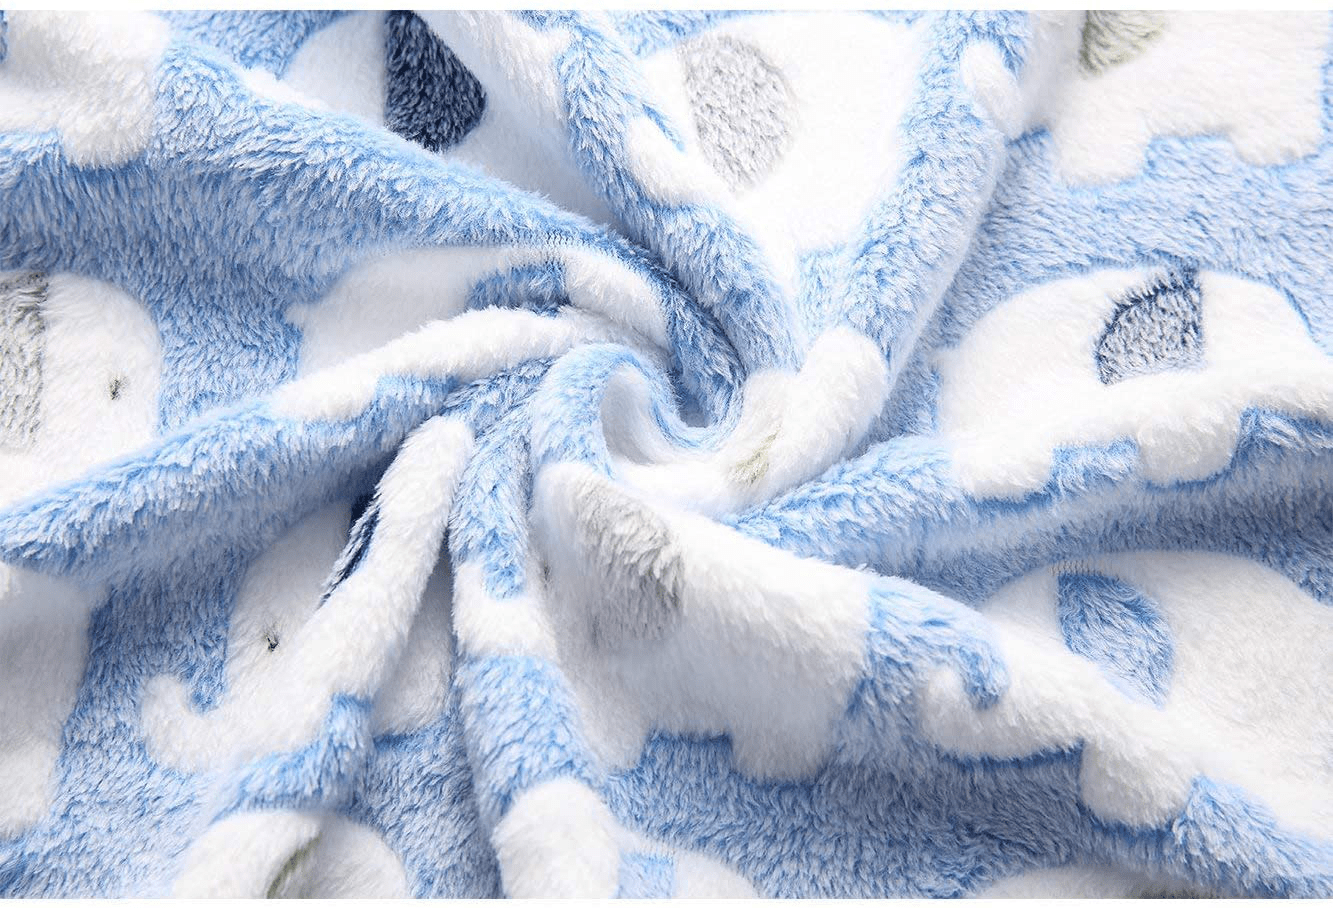 1 Pack 3 Blankets Super Soft Fluffy Premium Cute Elephant Pattern Pet Blanket Flannel Throw for Dog Puppy Cat